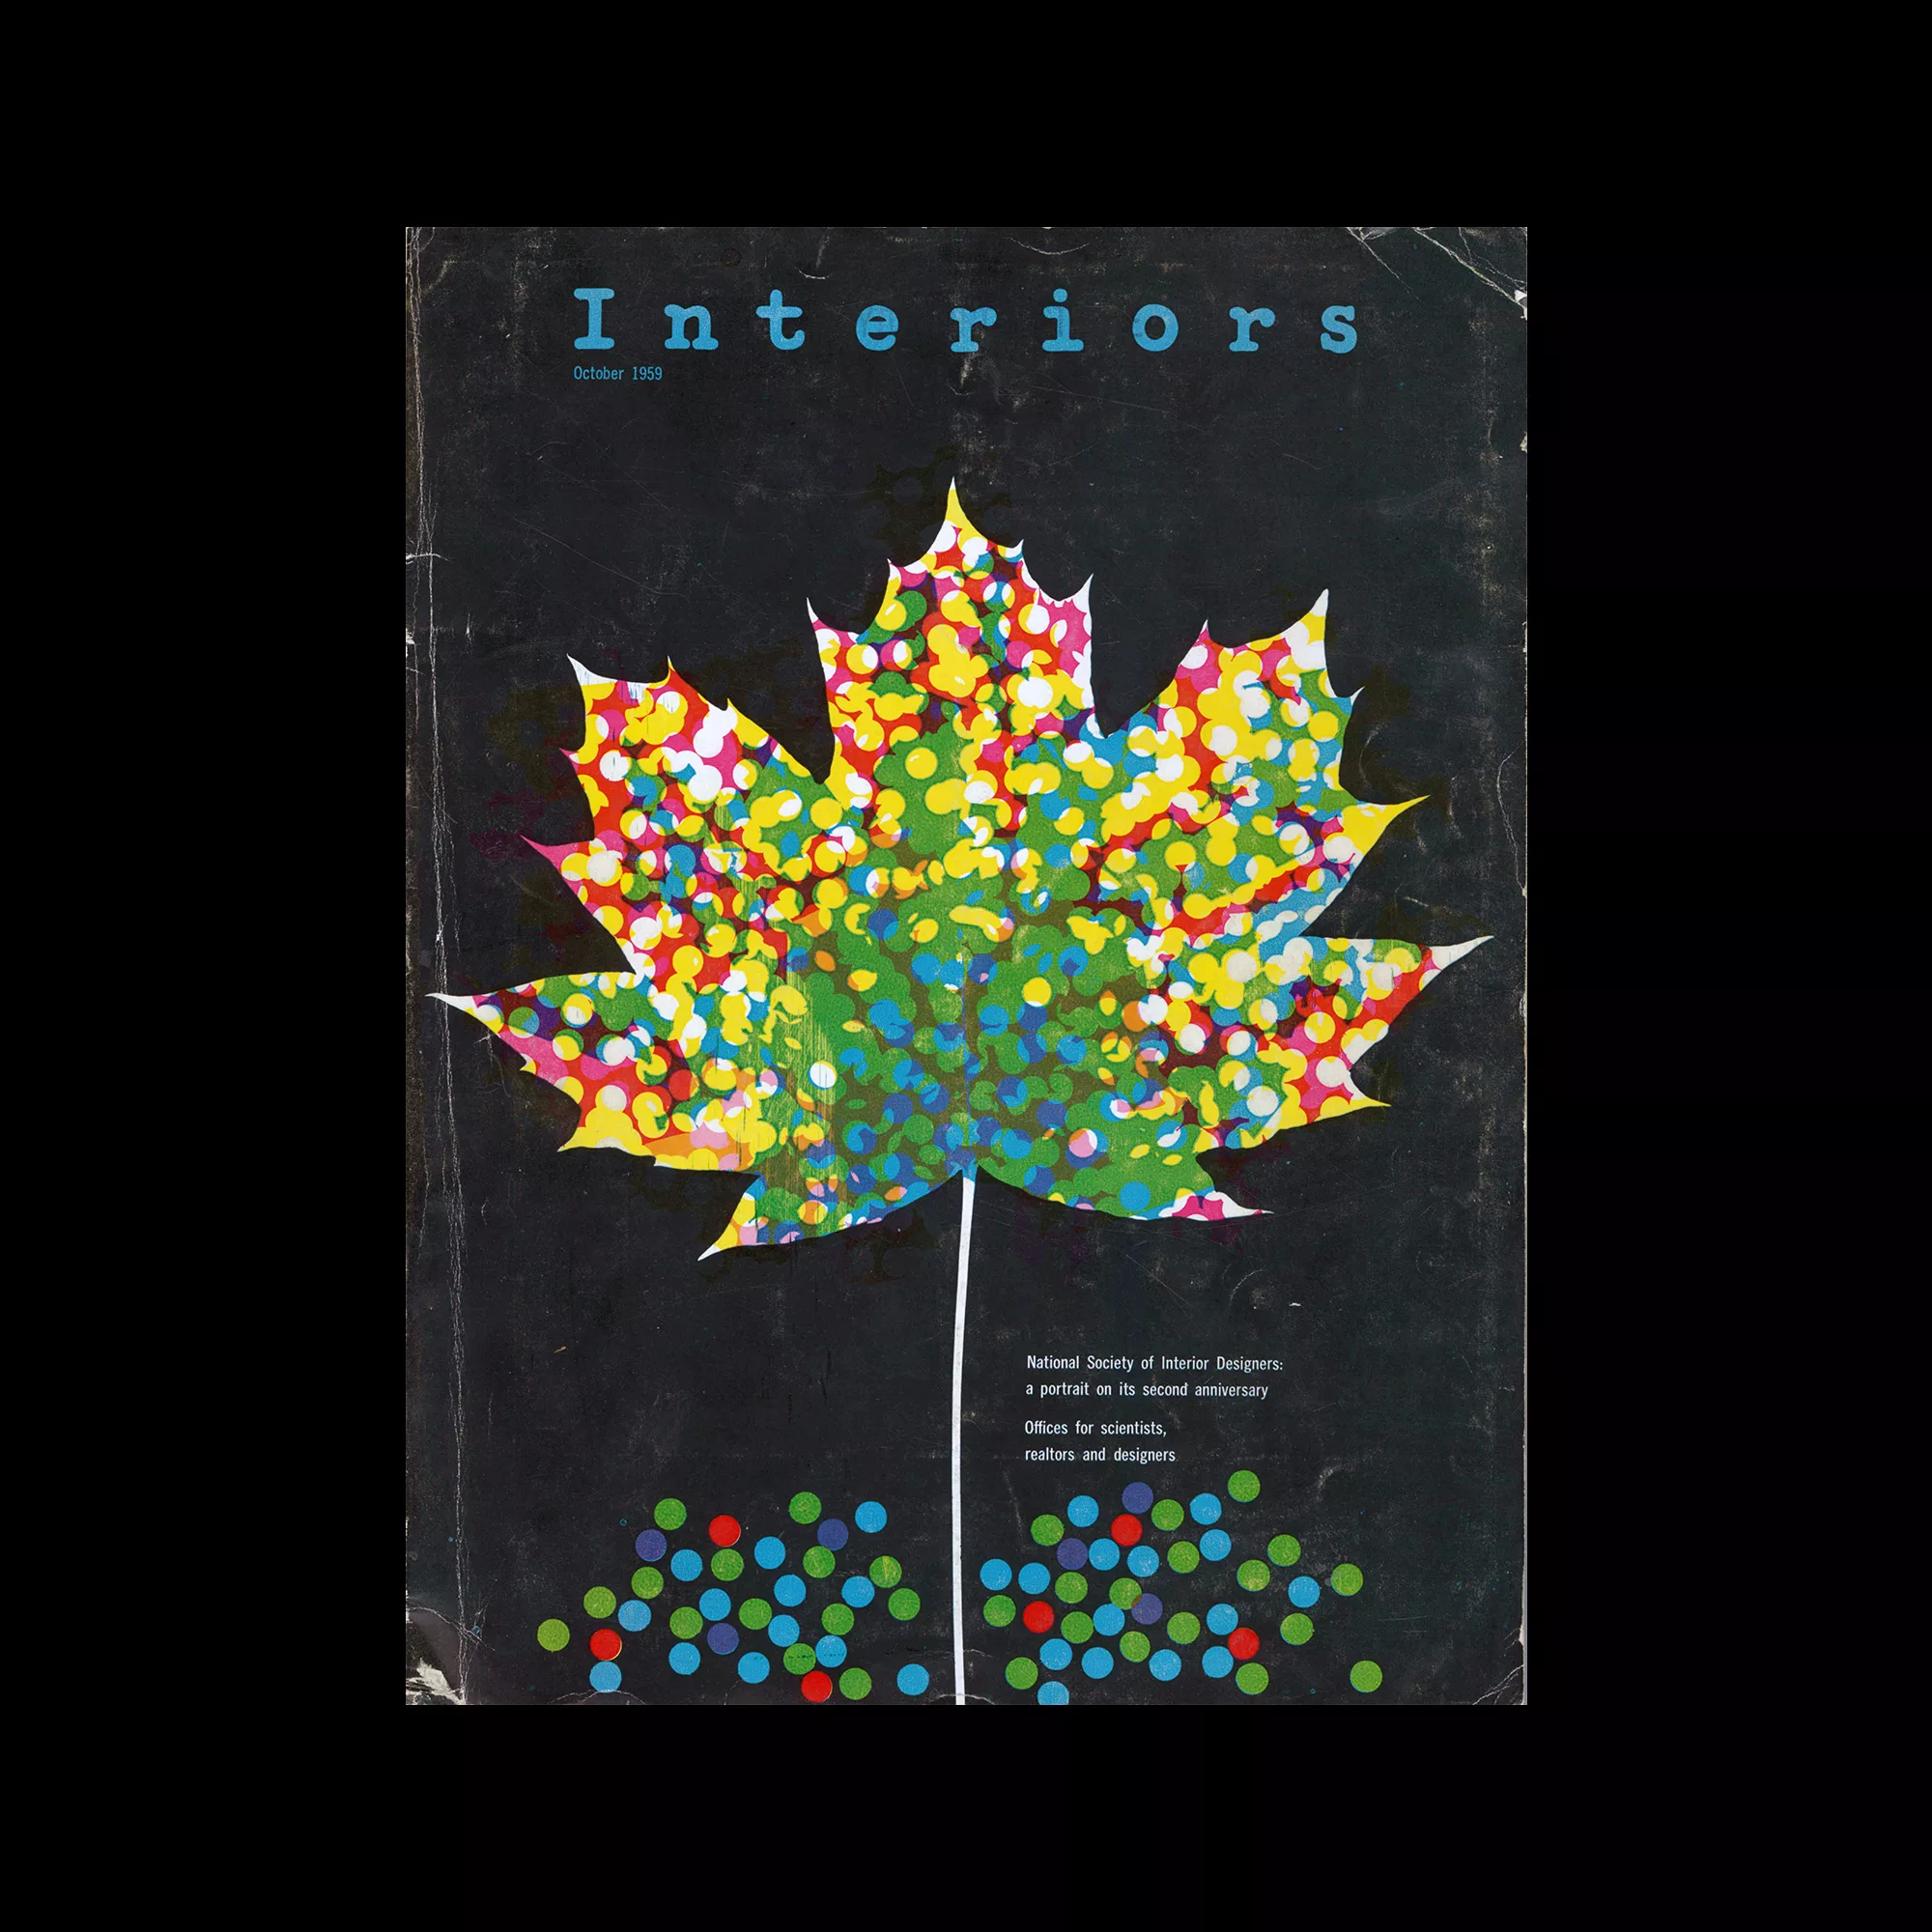 Interiors, October 1959. Cover design by Lou Klein